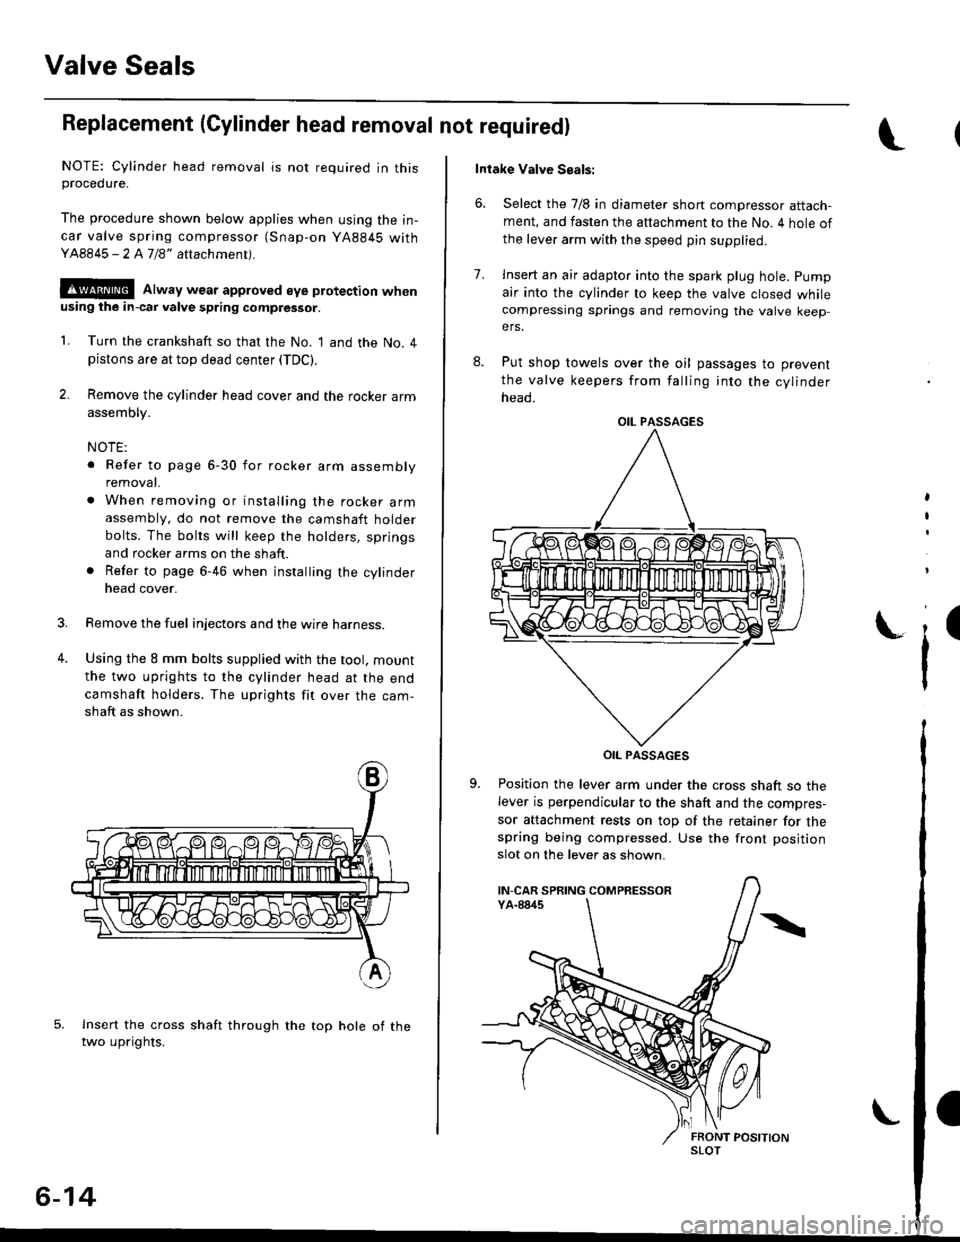 HONDA CIVIC 1996 6.G Workshop Manual Valve Seals
Replacement (Cylinder head removal not requiredl
NOTE: Cylinder head removal is not required in thisprocedure.
The procedure shown below applies when using the in-
car valve spring compres